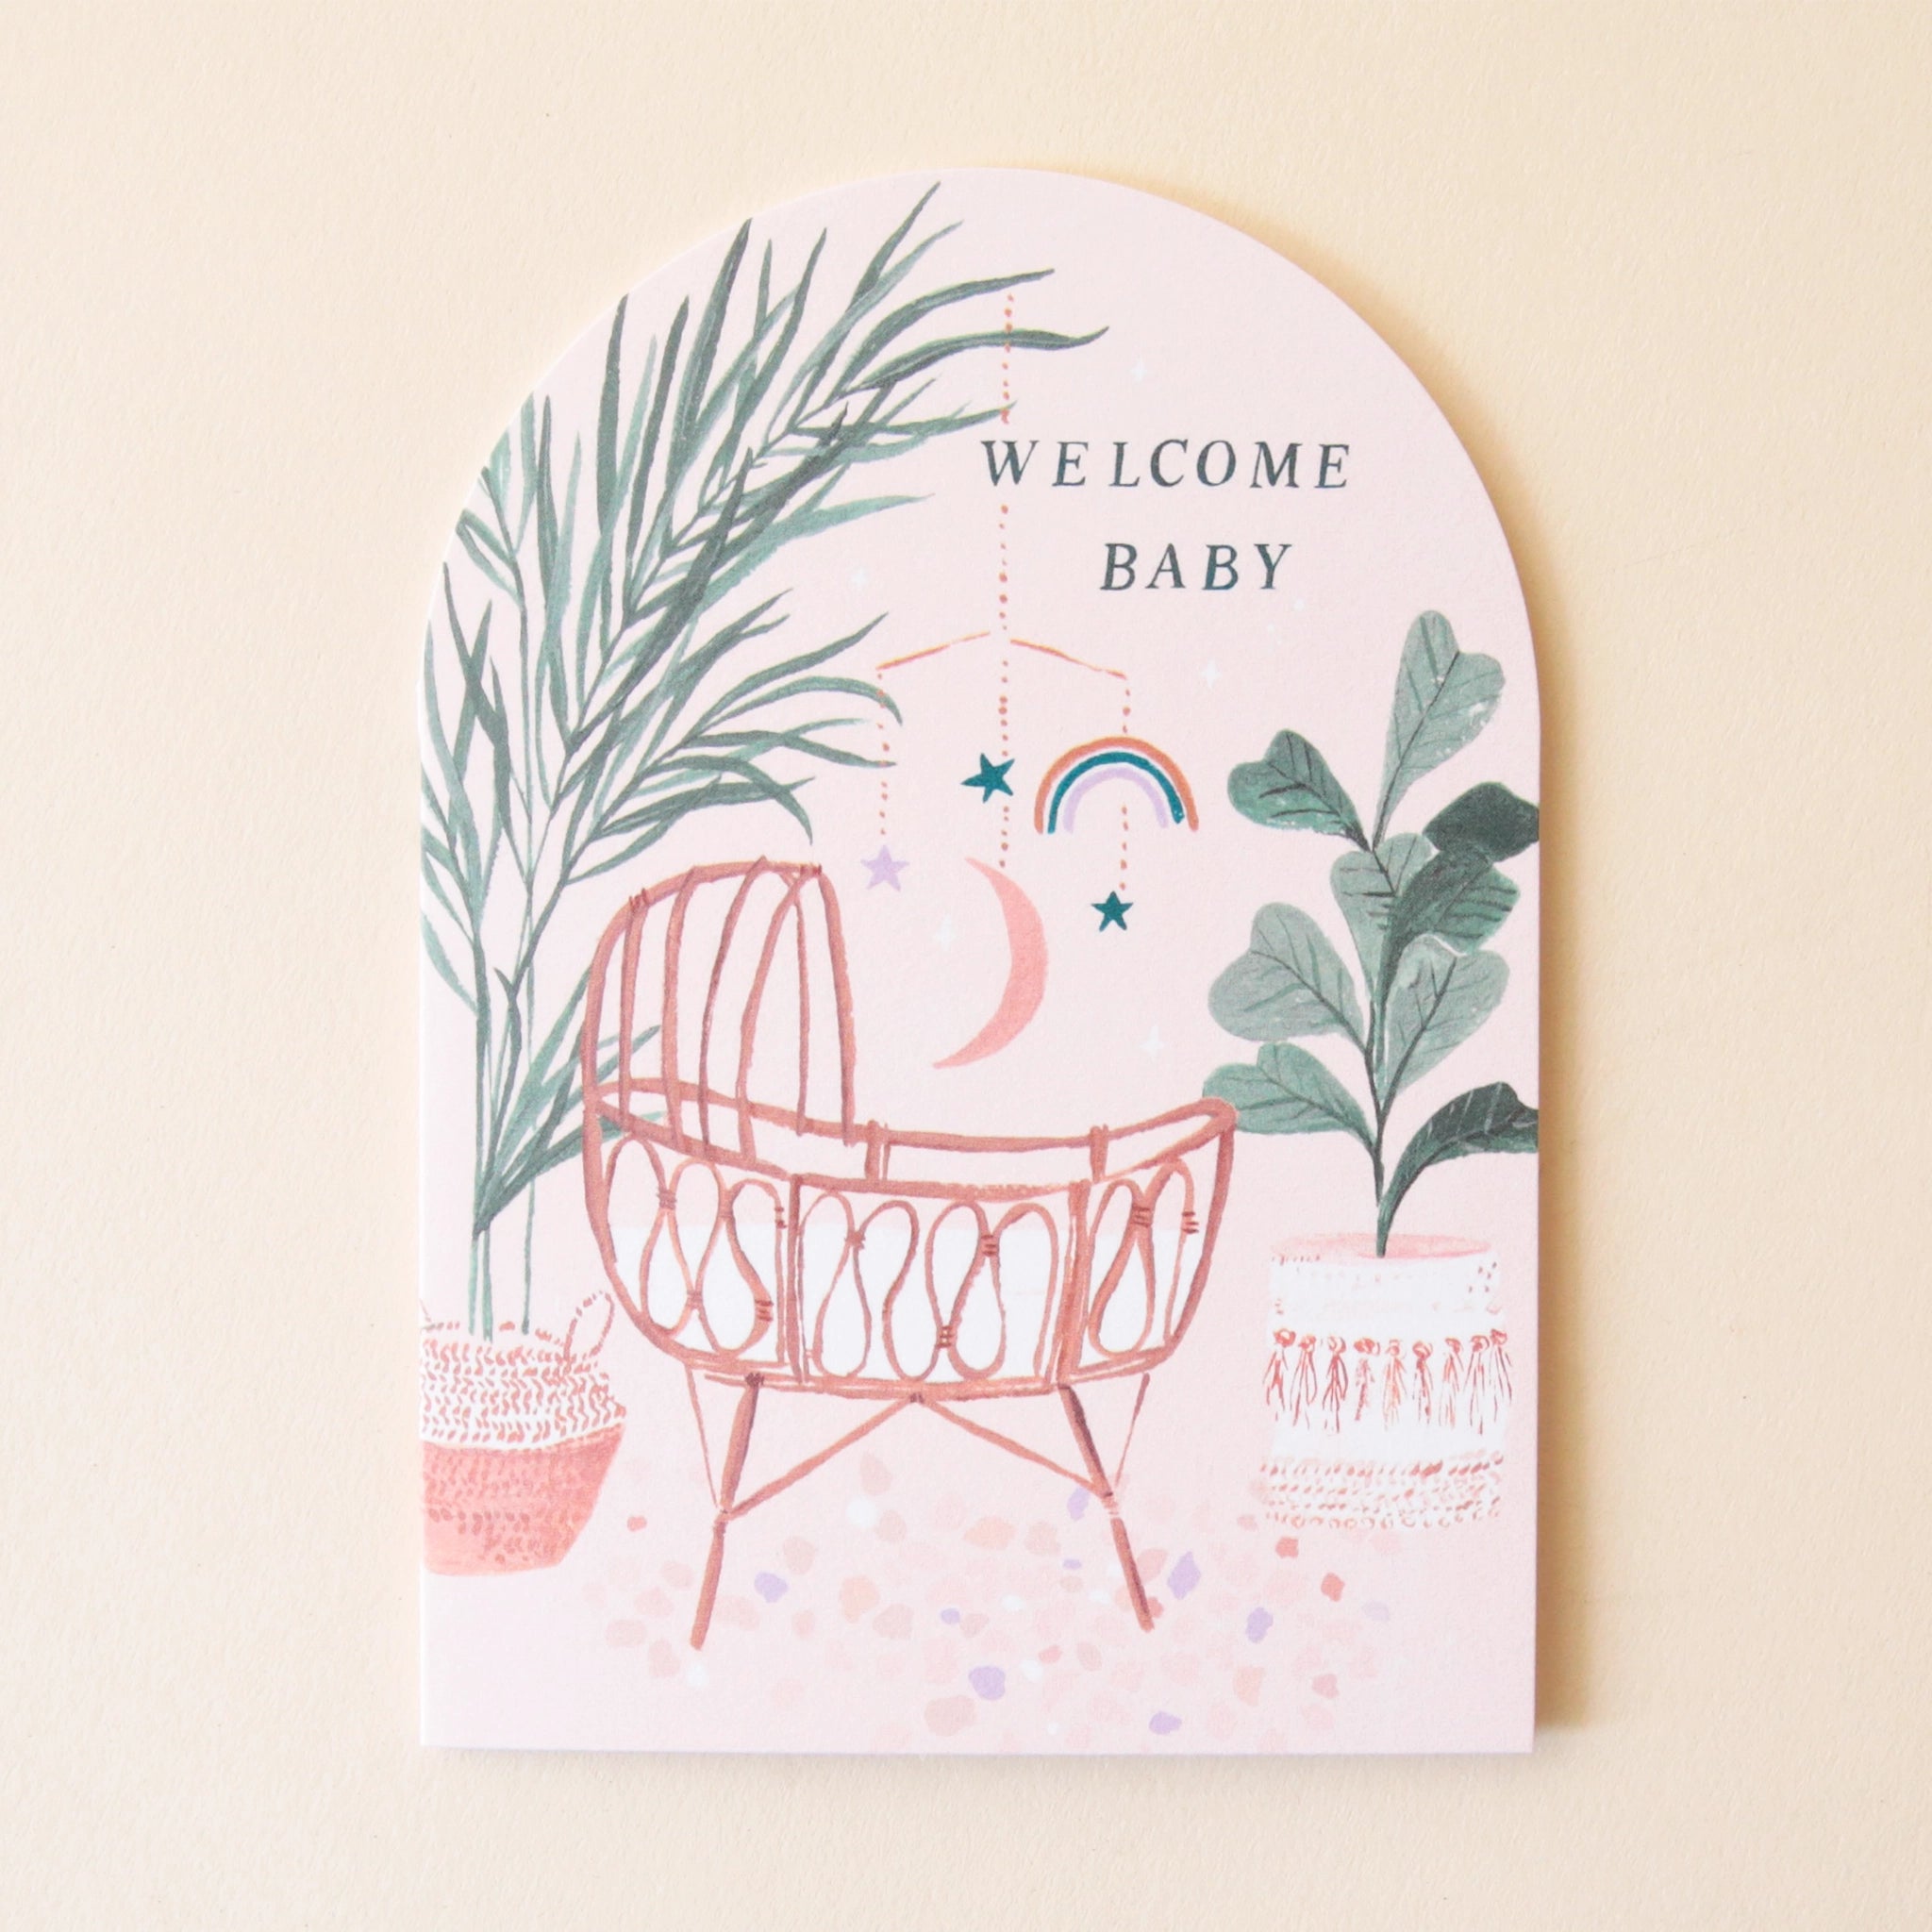 An arched greeting card with a sunset desert color pallet along with an illustration of a woven rattan baby&#39;s crib along with bohemian illustrations of lush natural foliage, bamboo, palm trees, and dried flowers and text at the top that reads, &quot;Welcome Baby&quot; in black letters.